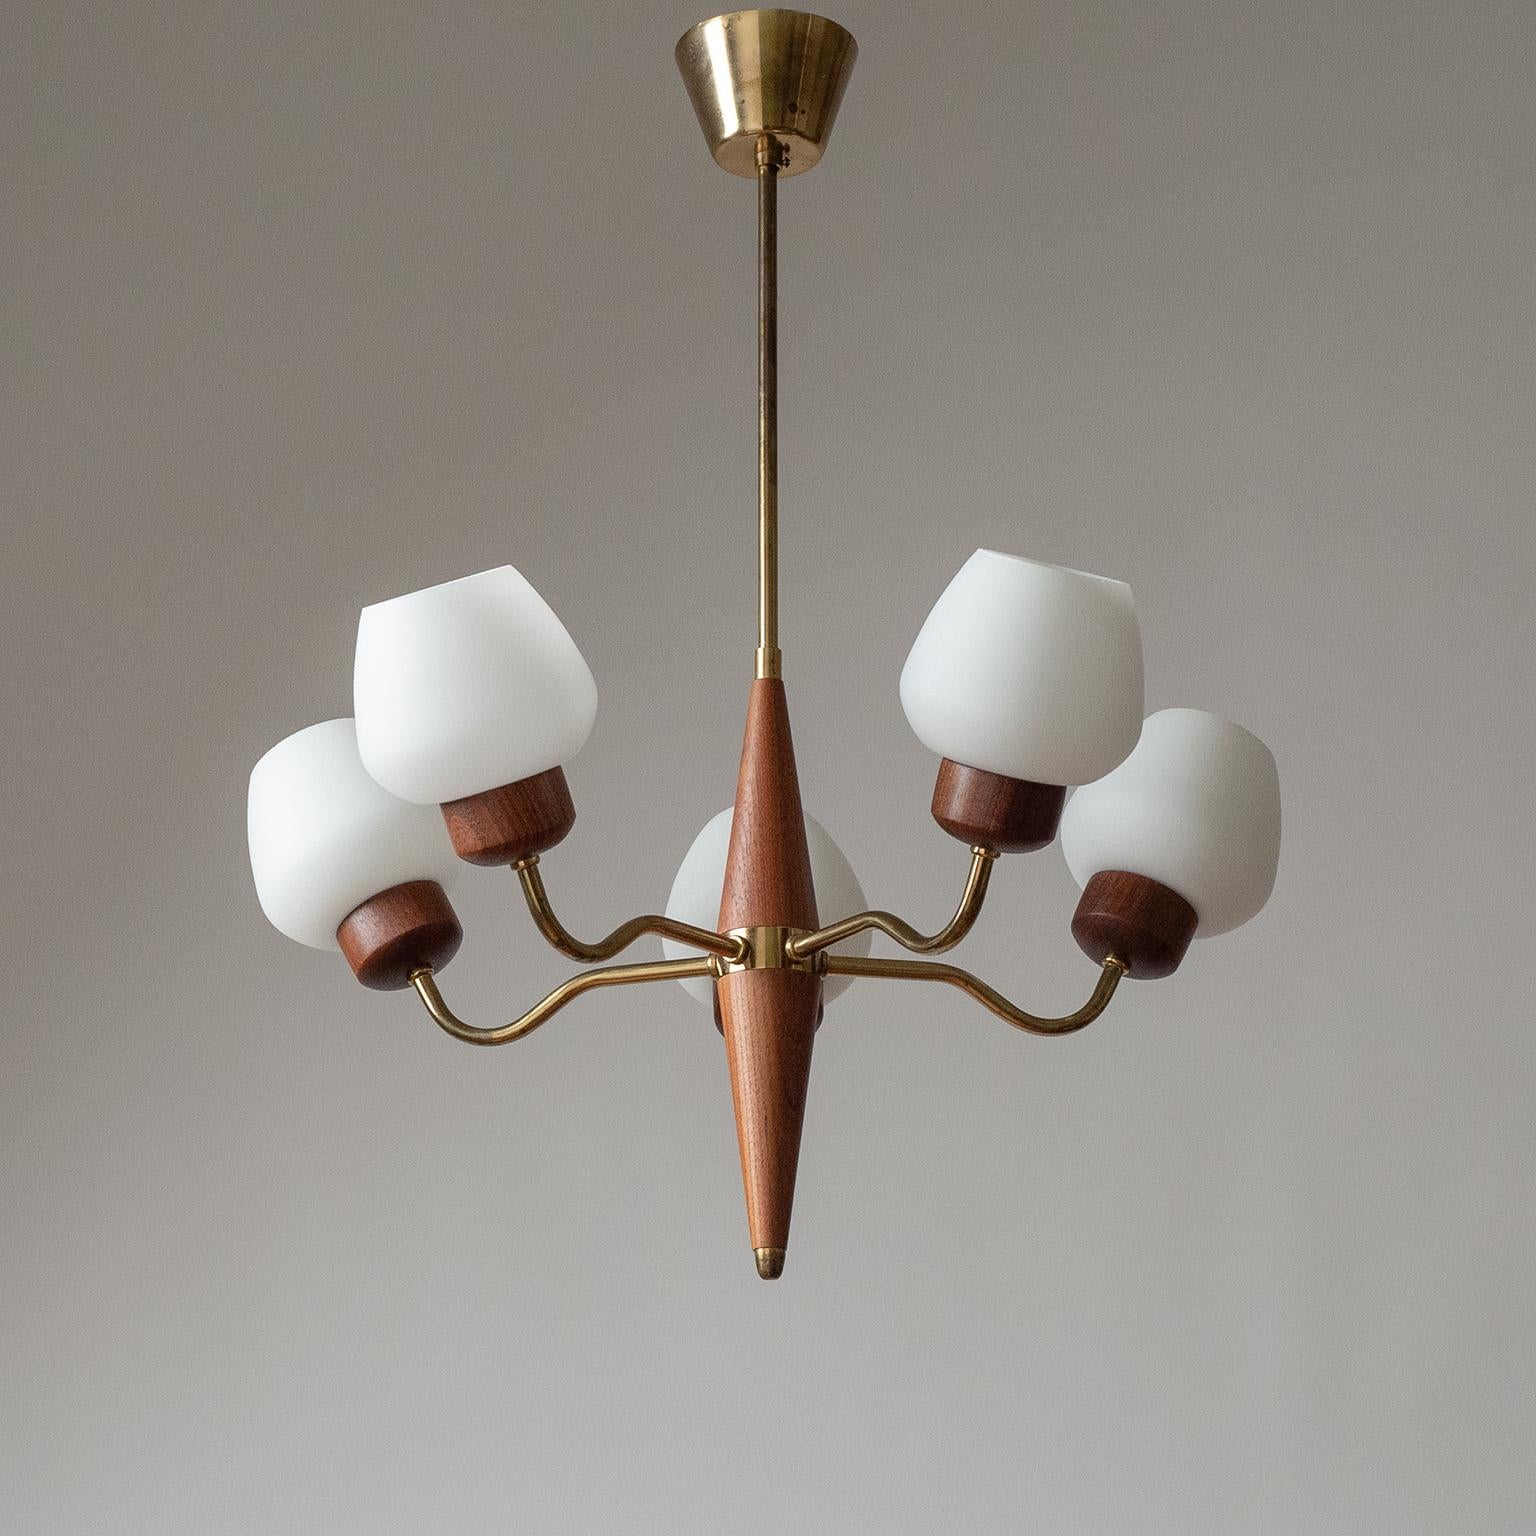 Fine Swedish 5-arm chandelier fro the 1950s. Sleek solid teak centerpiece with five brass arms, each with a solid teak socket cover and satin glass diffuser. Original bakelite E27 sockets with new wiring.
Body height 30cm/12inches.